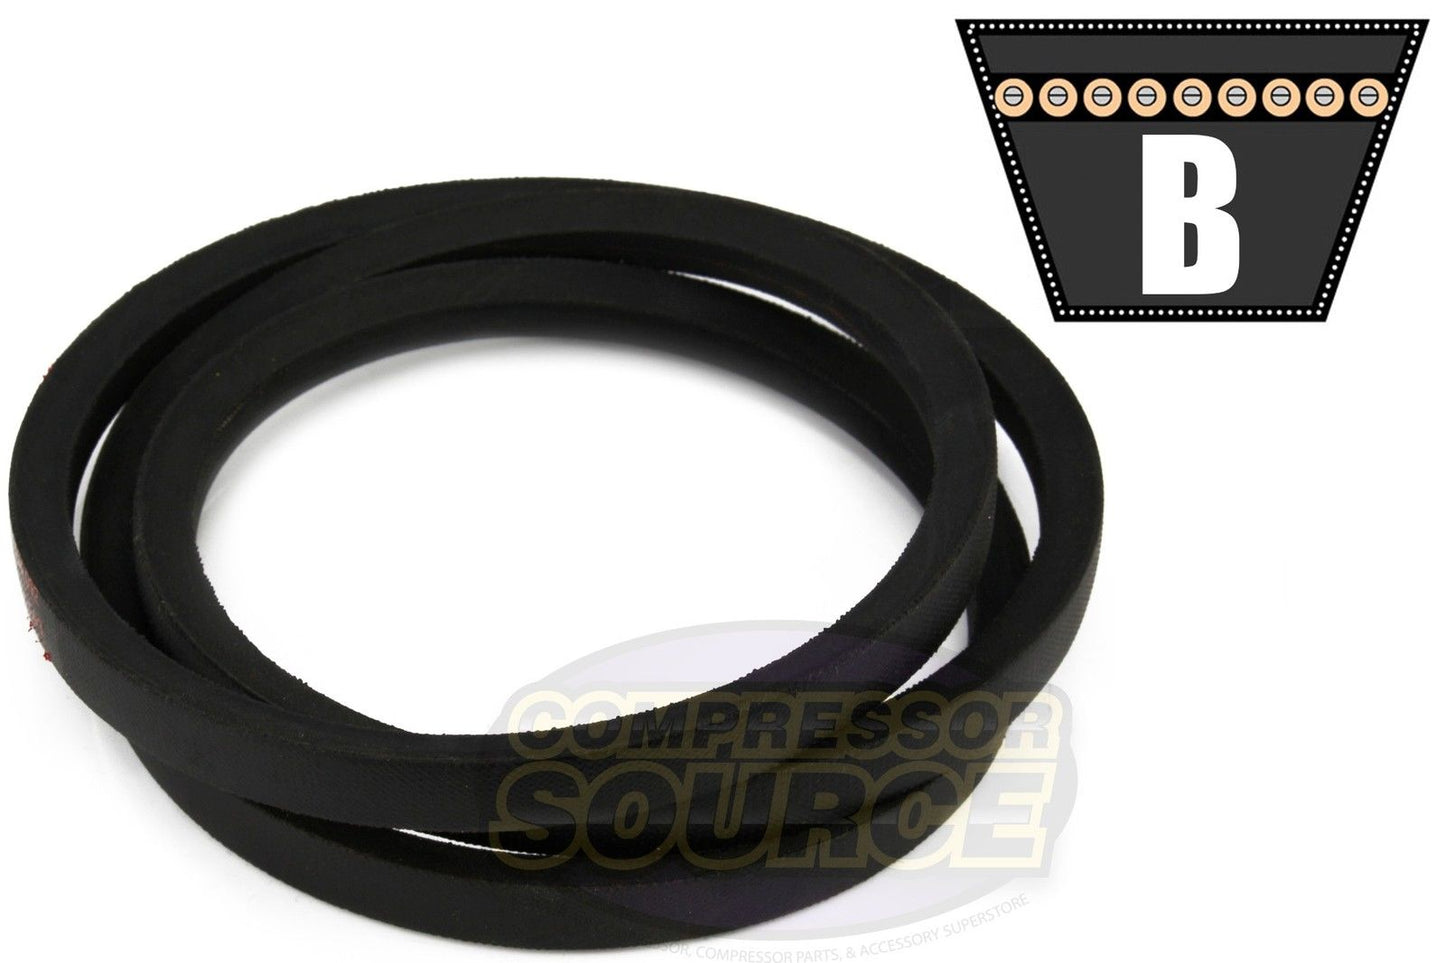 B54 Industrial & Lawn Mower 5/8" x 57" V Belt 5L570 Replacement High Quality